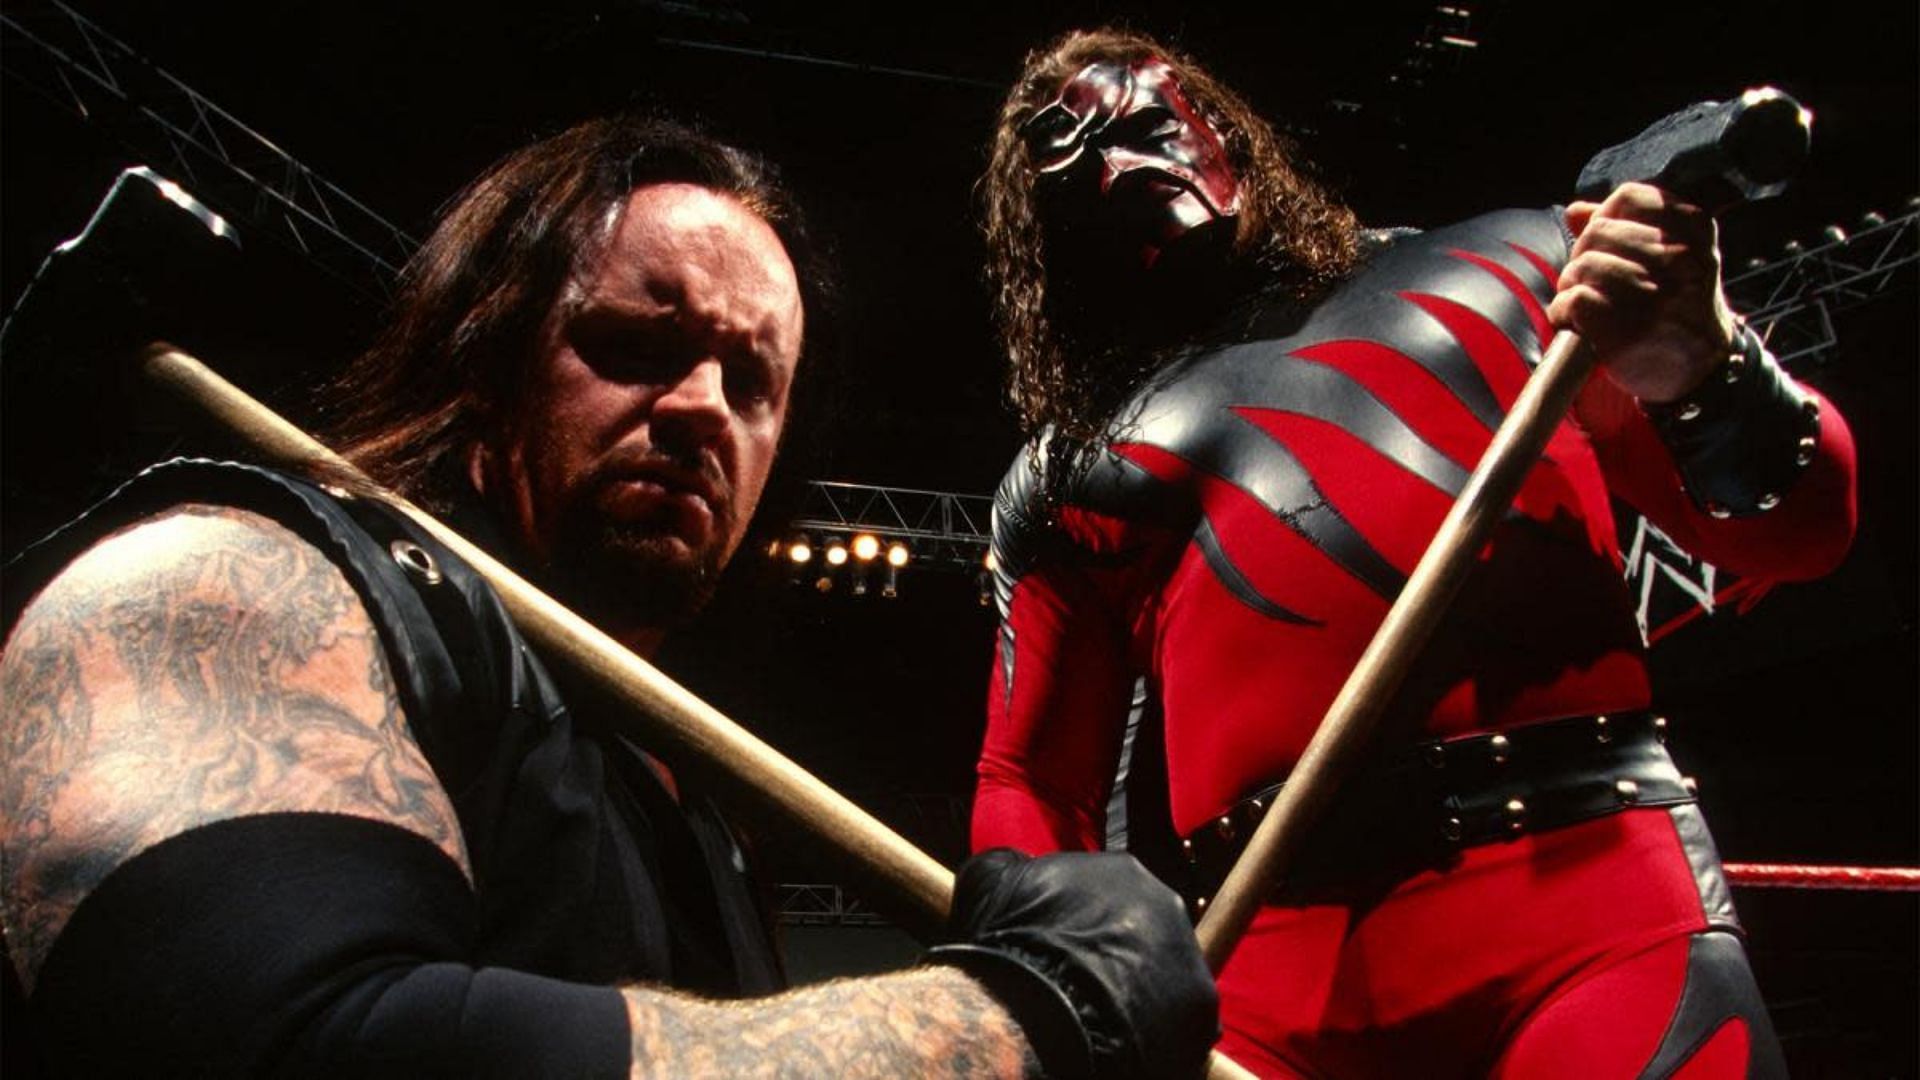 The Brothers of Destruction fought many battles spanning multiple eras